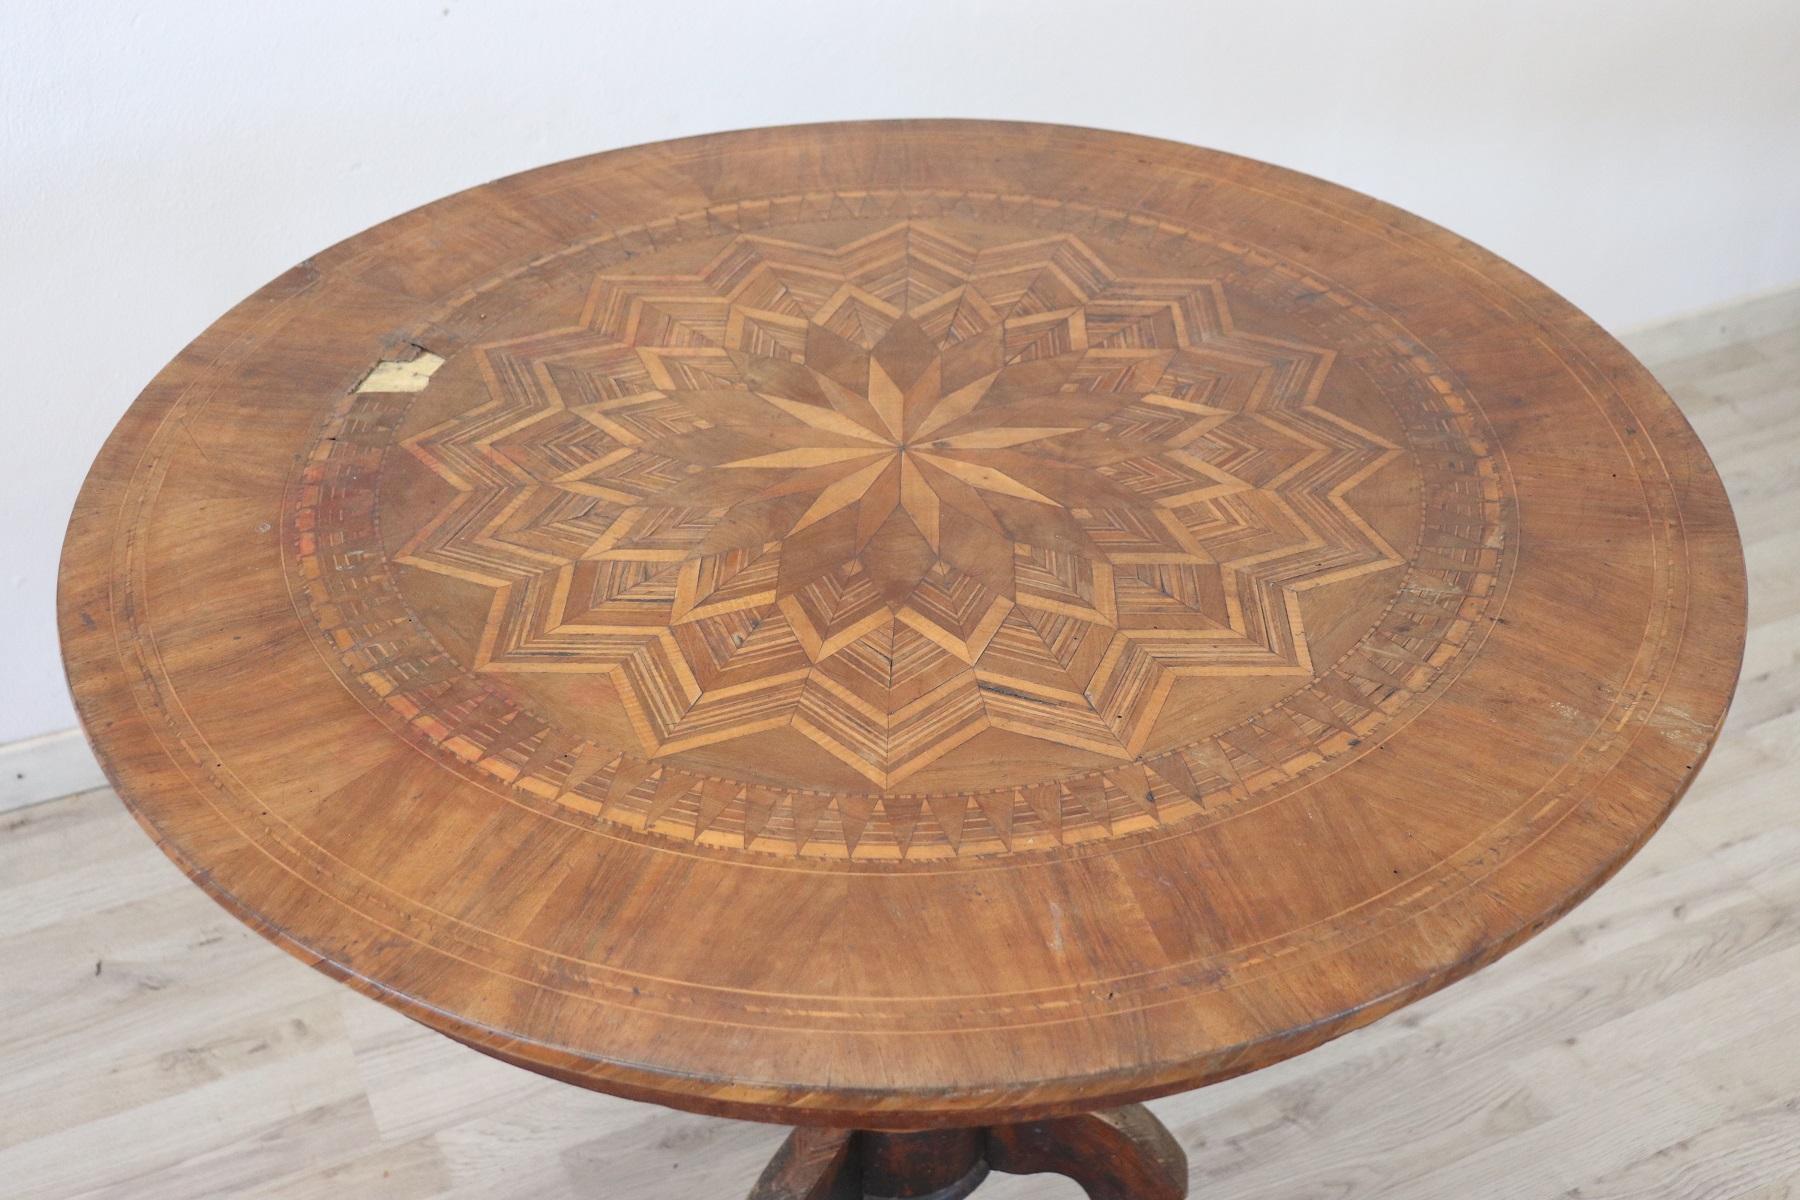 Beautiful important antique round table, 1850s in walnut. The plan presents precious work of inlay. The inlaid decoration is of geometric and floral taste made with small pieces of different and precious woods. Please look at all the images to